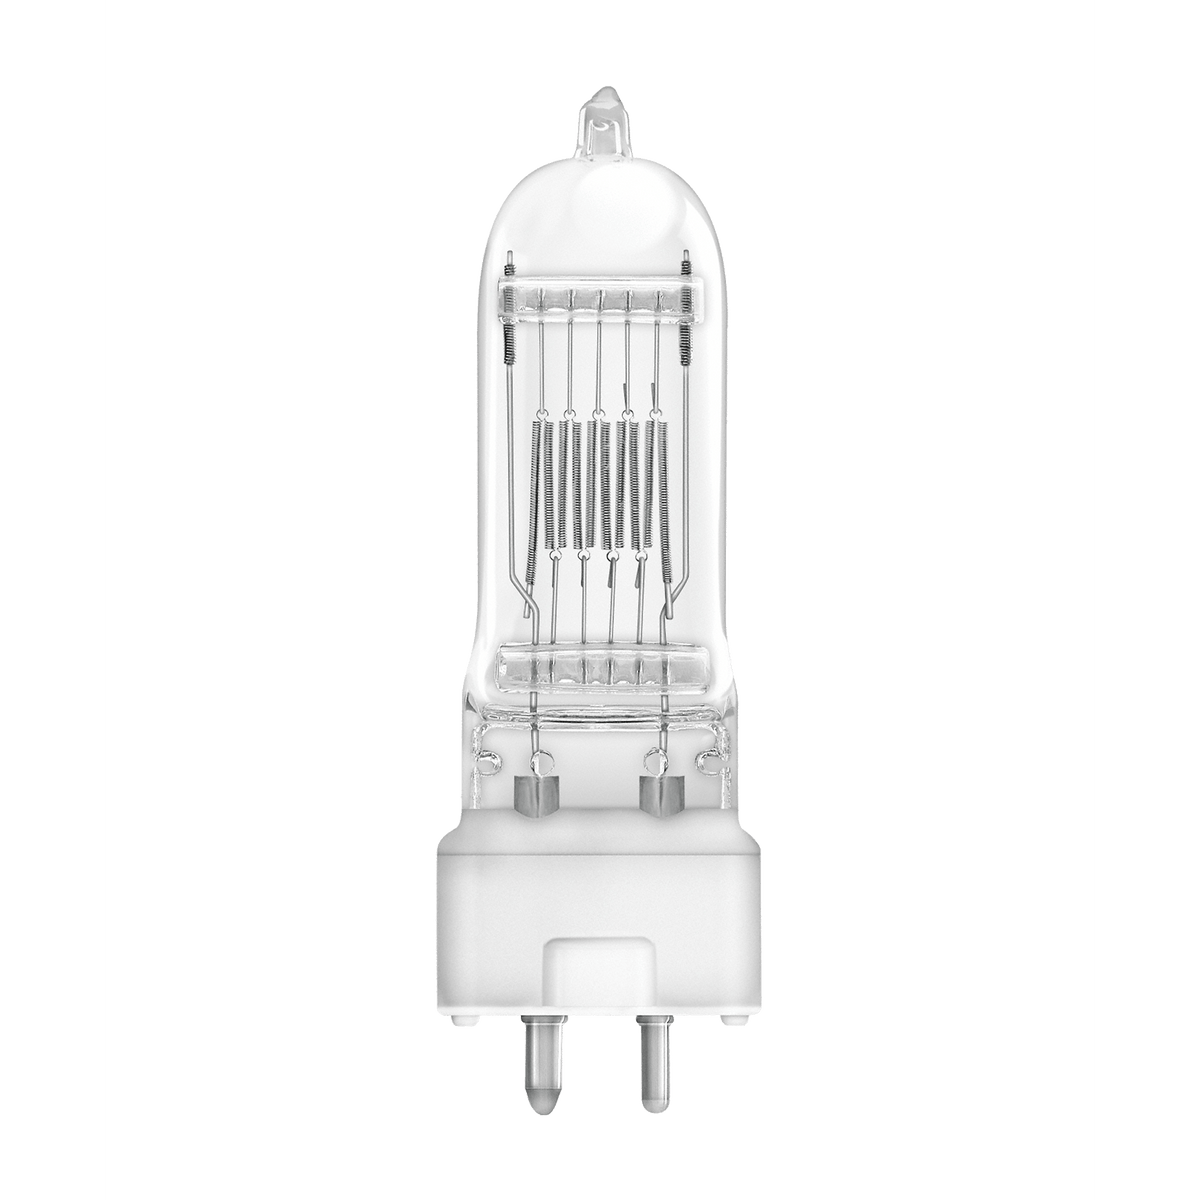 OSRAM CP89 64717 FRM 650w 240v GY9.5 Lamp